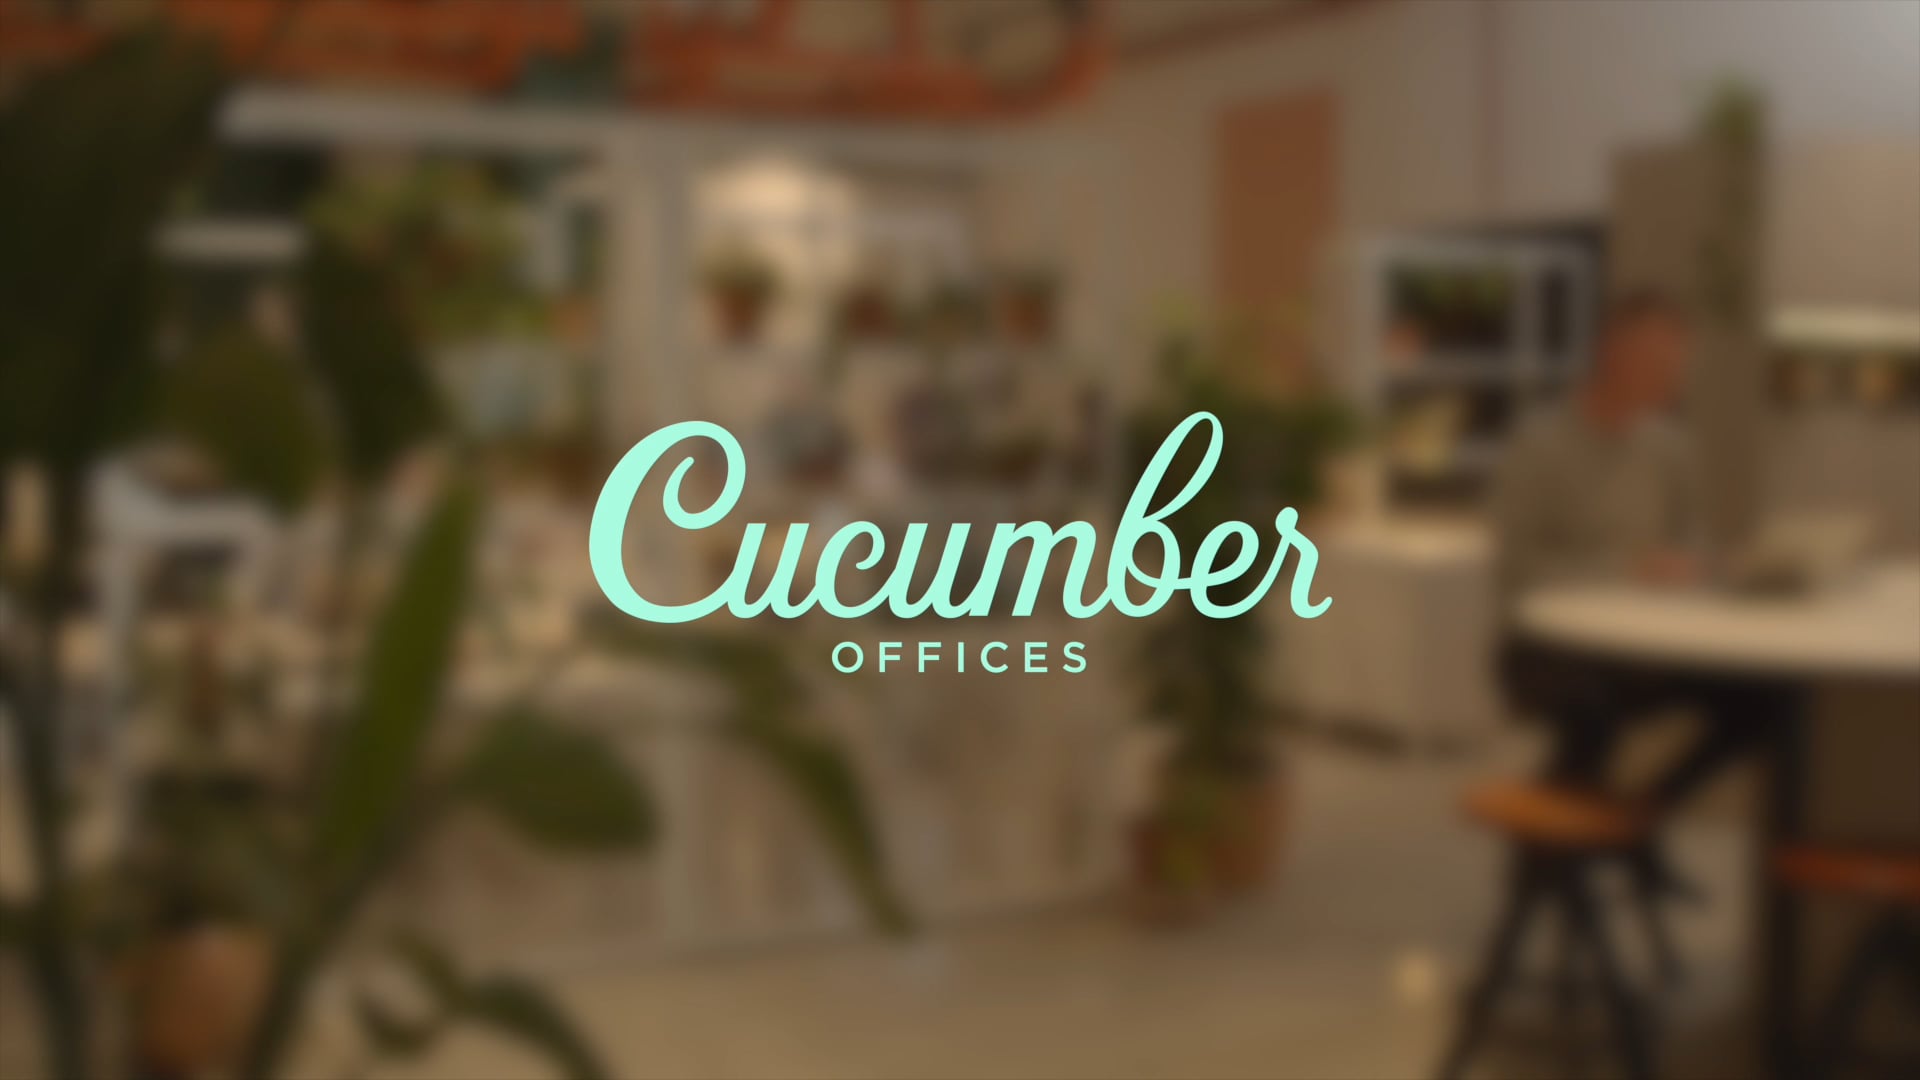 Cucumber Offices | Promotional Video